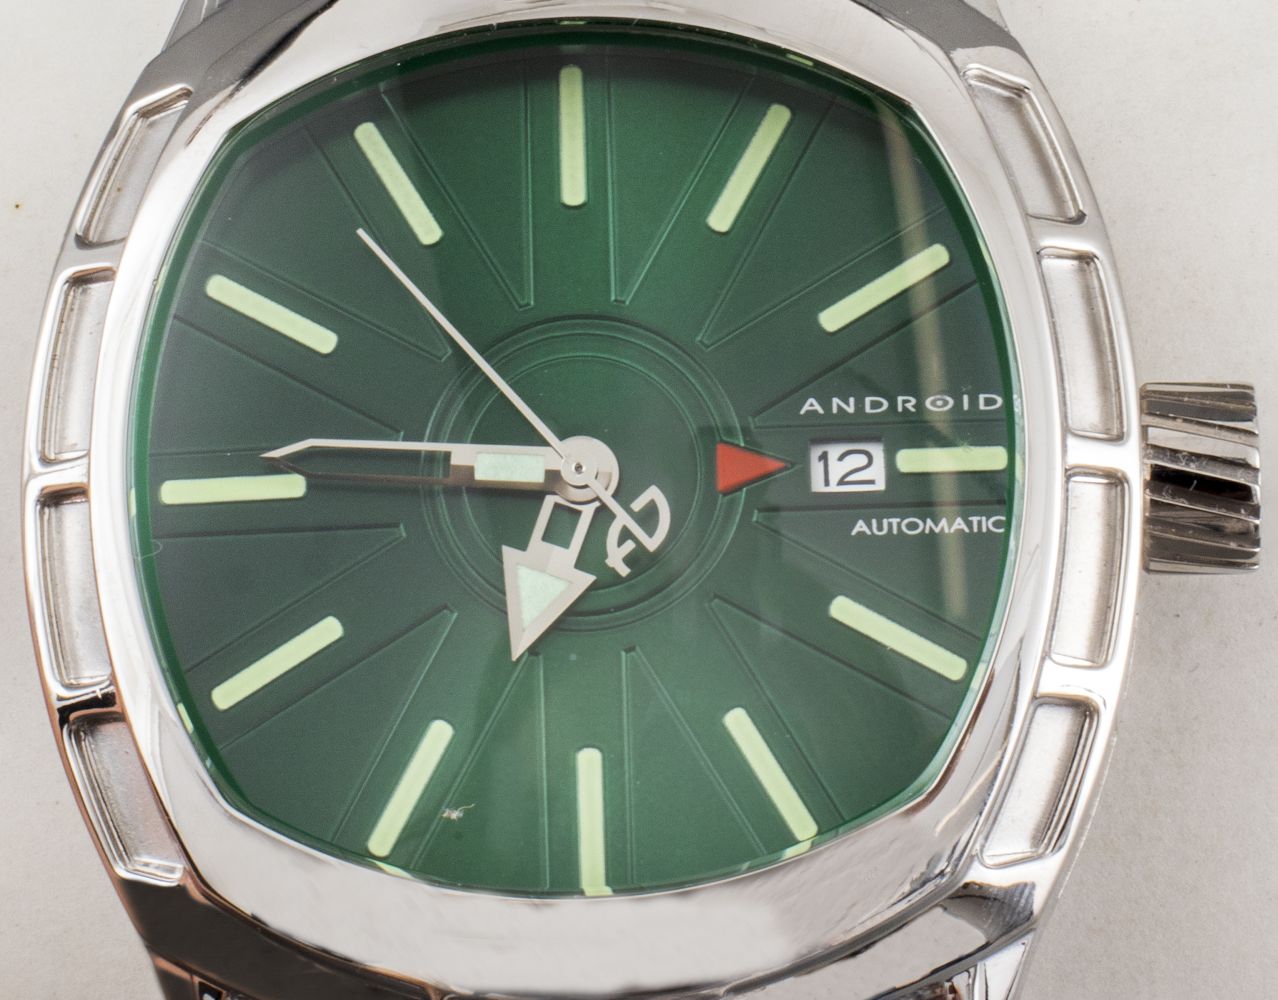 ANDROID "COCOON" AUTOMATIC WATCH